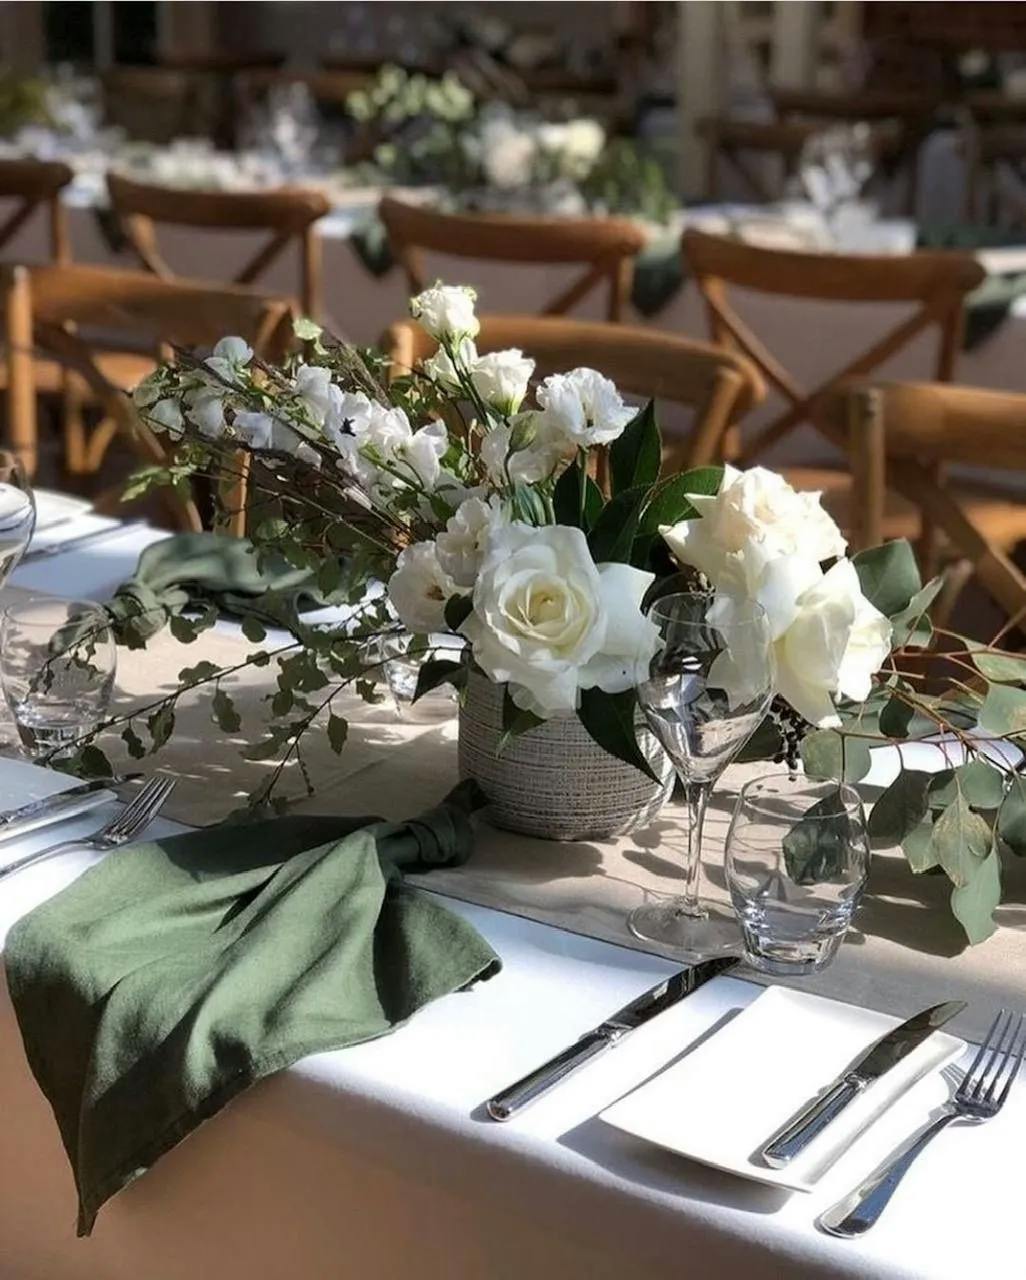 A close-up of an elegantly set dining table for an event. The table features a centerpiece with white roses and greenery. Each place setting includes silver cutlery, a wine glass, water glass, and a dark green napkin. Brown wooden chairs line the table.